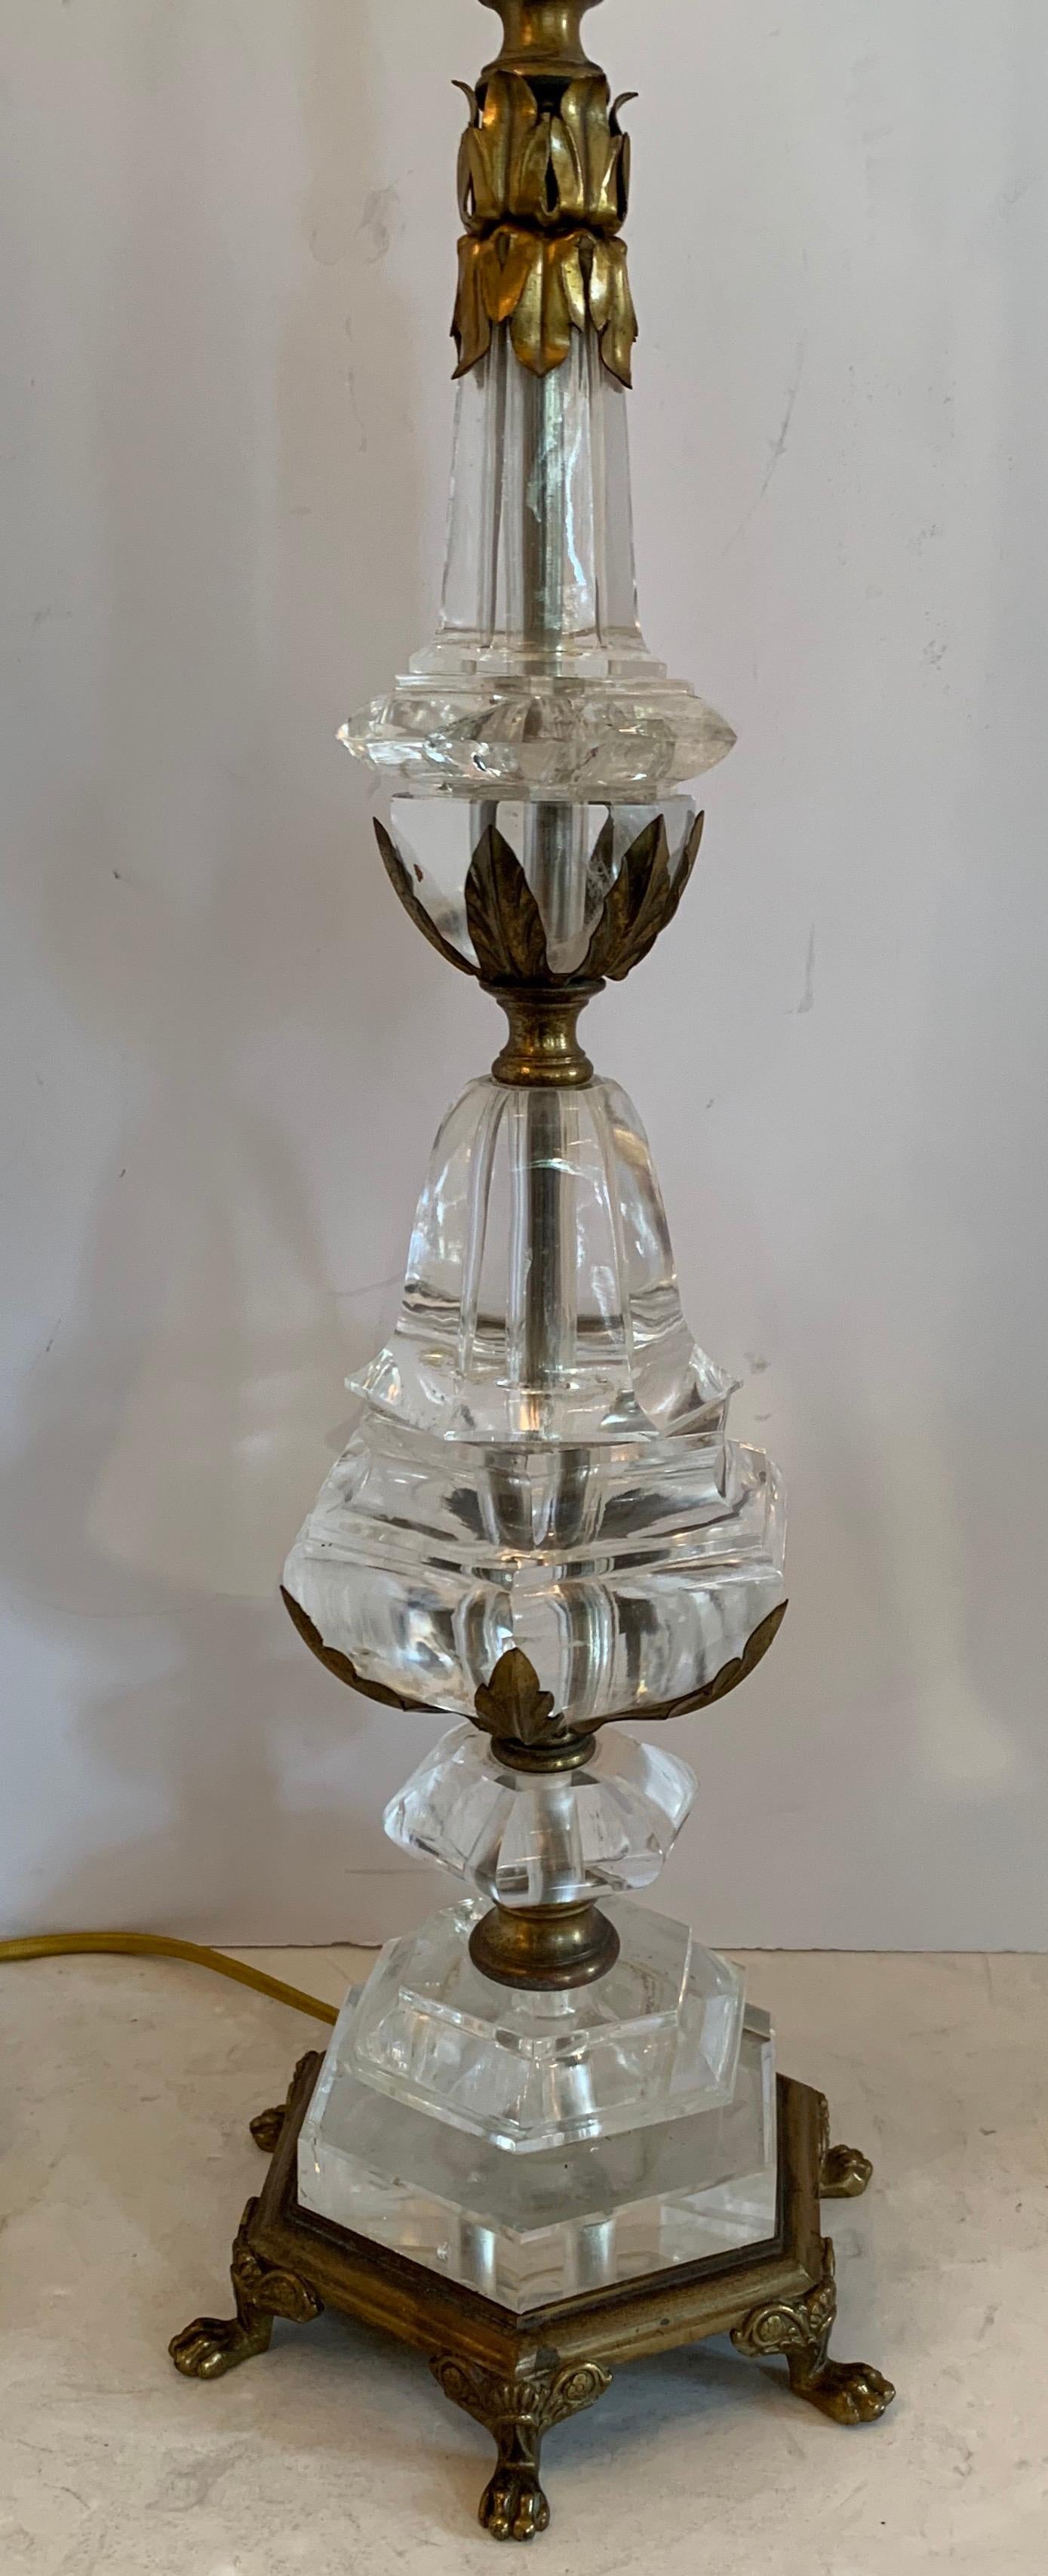 A wonderful French rock crystal and bronze ormolu mounted Regency Empire style lamp in the manner of E.F. Caldwell.